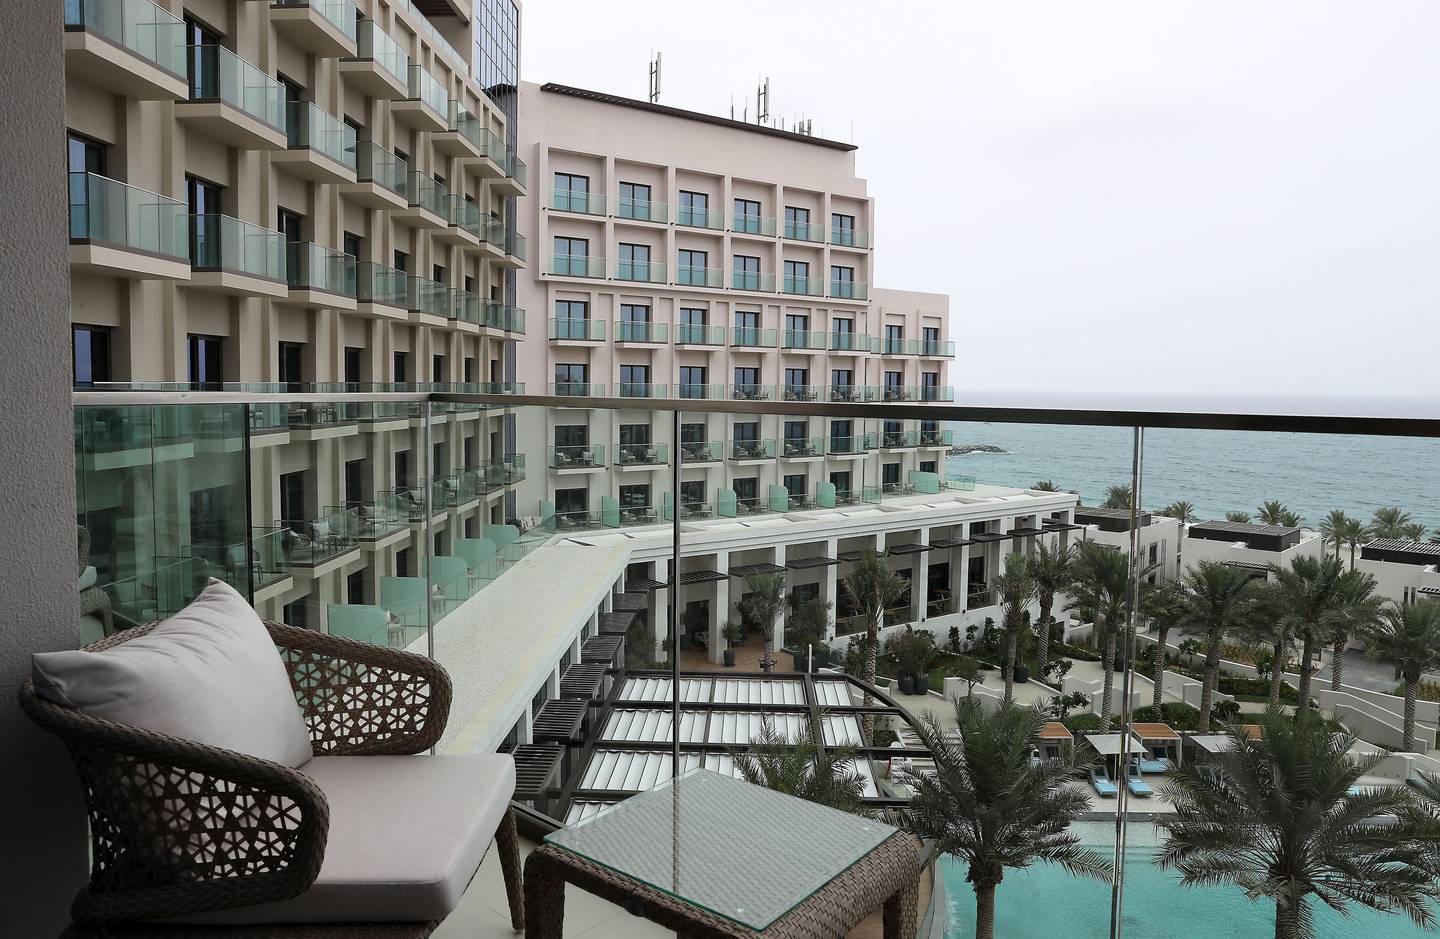 Address Beach Resort Fujairah has opened on the east coast with views of the ocean on one side and the Hajar Mountains on the other